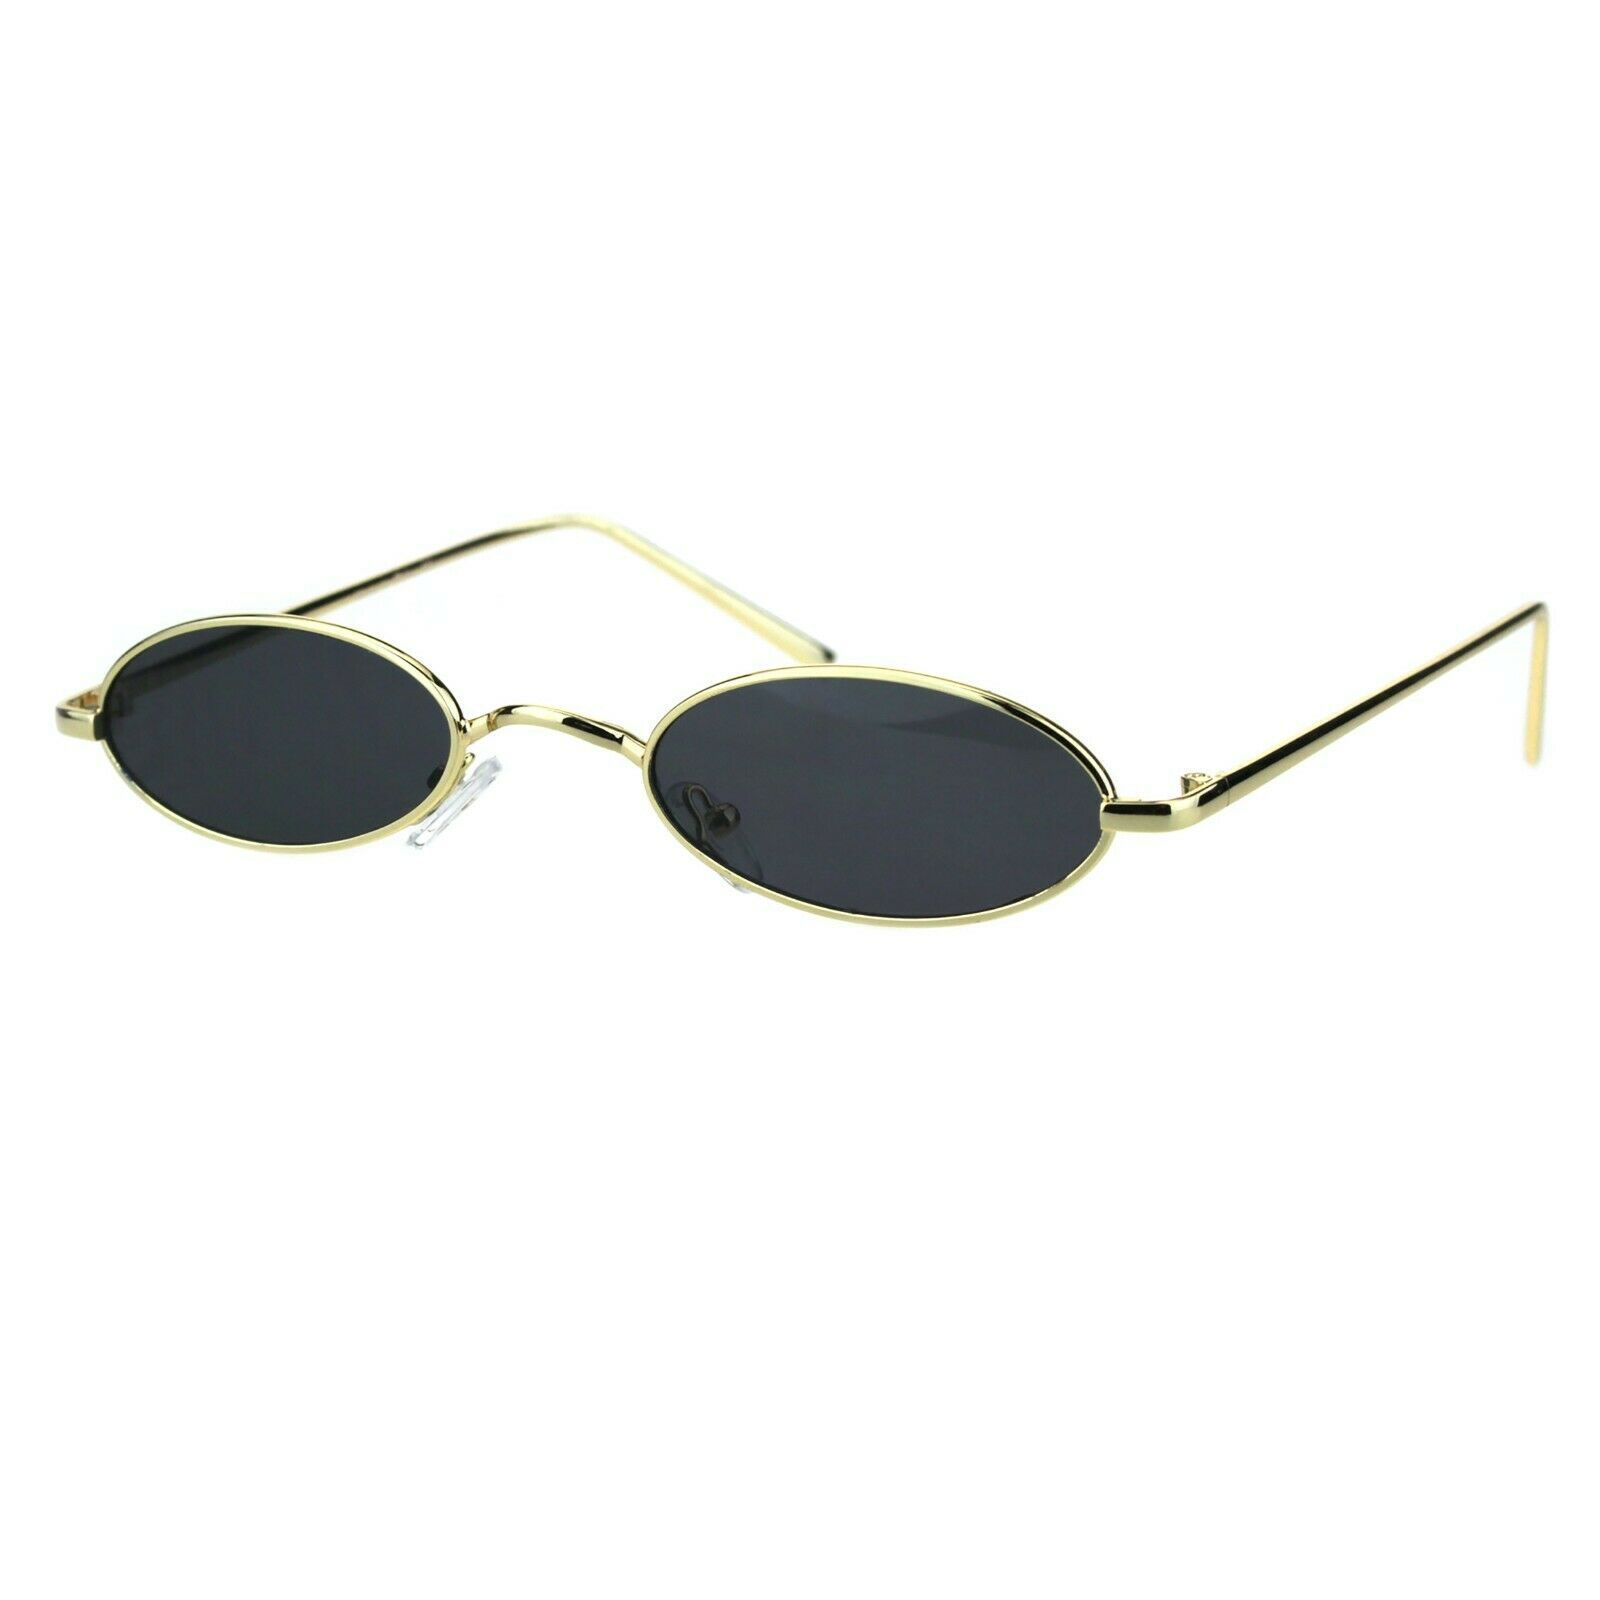 Thin Skinny Oval Sunglasses Gold Metal Small Frame Wide Bridge Low Fit ...